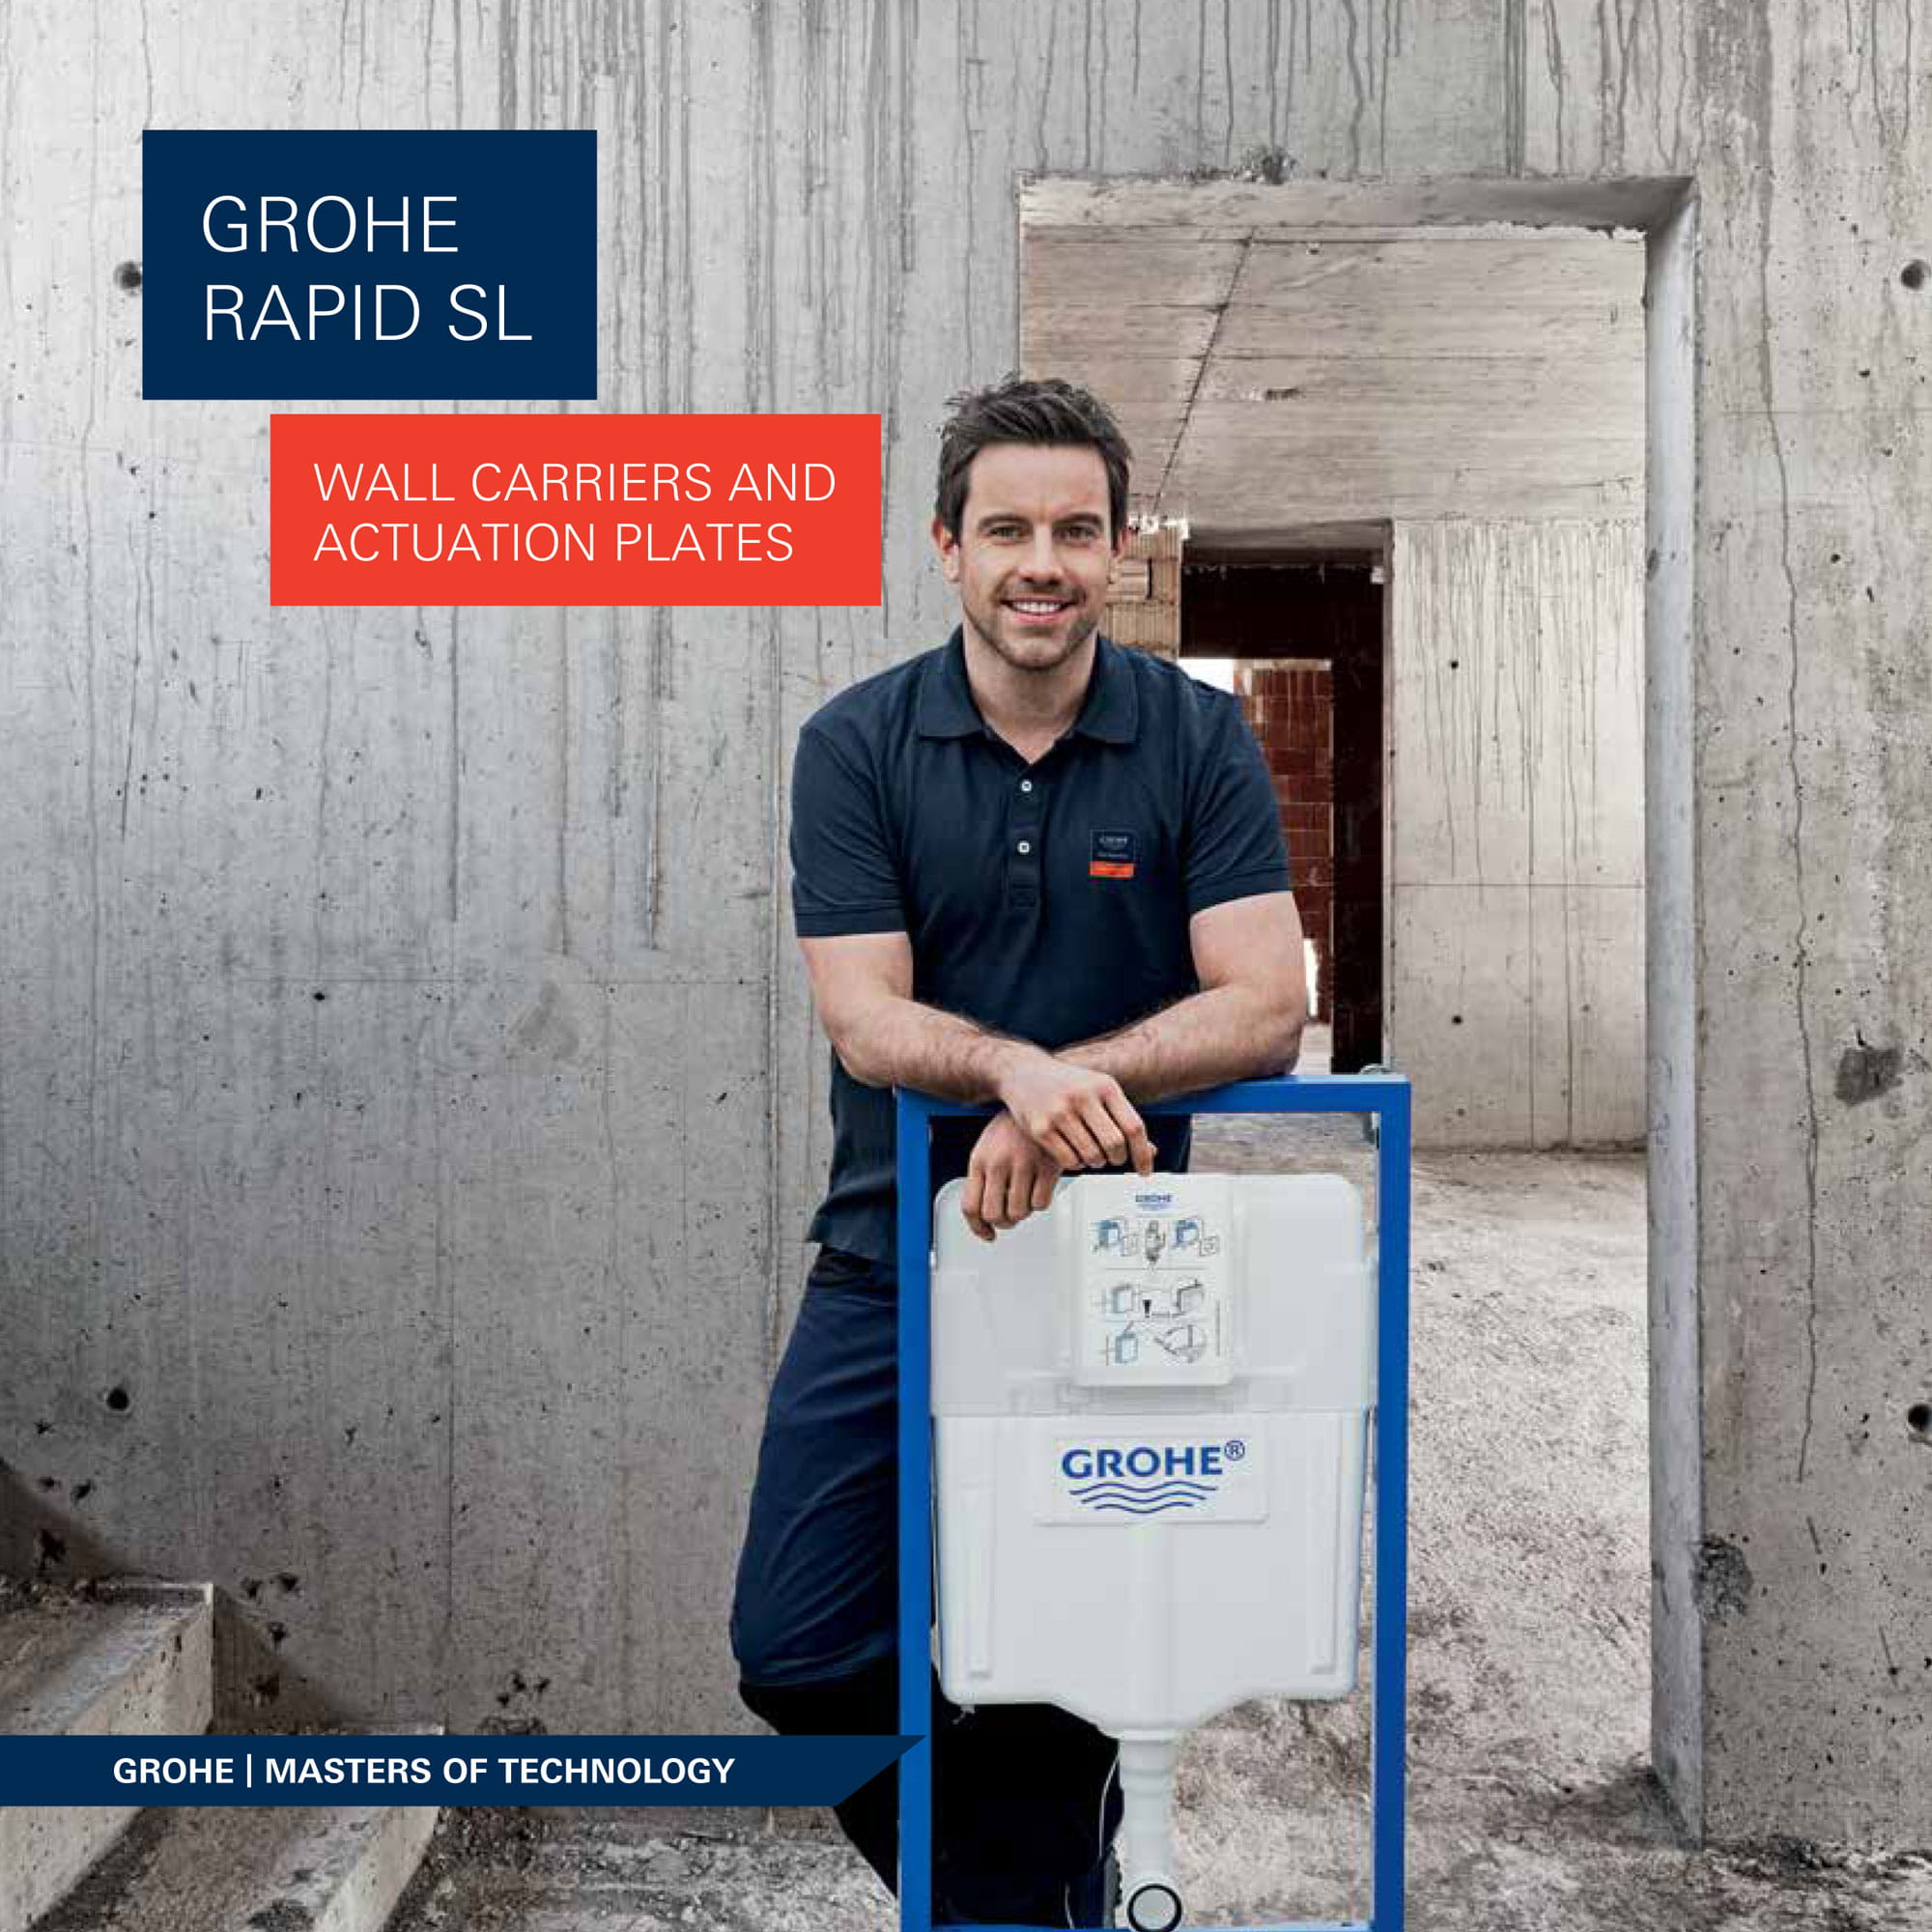 GROHE worker holding wall carrier